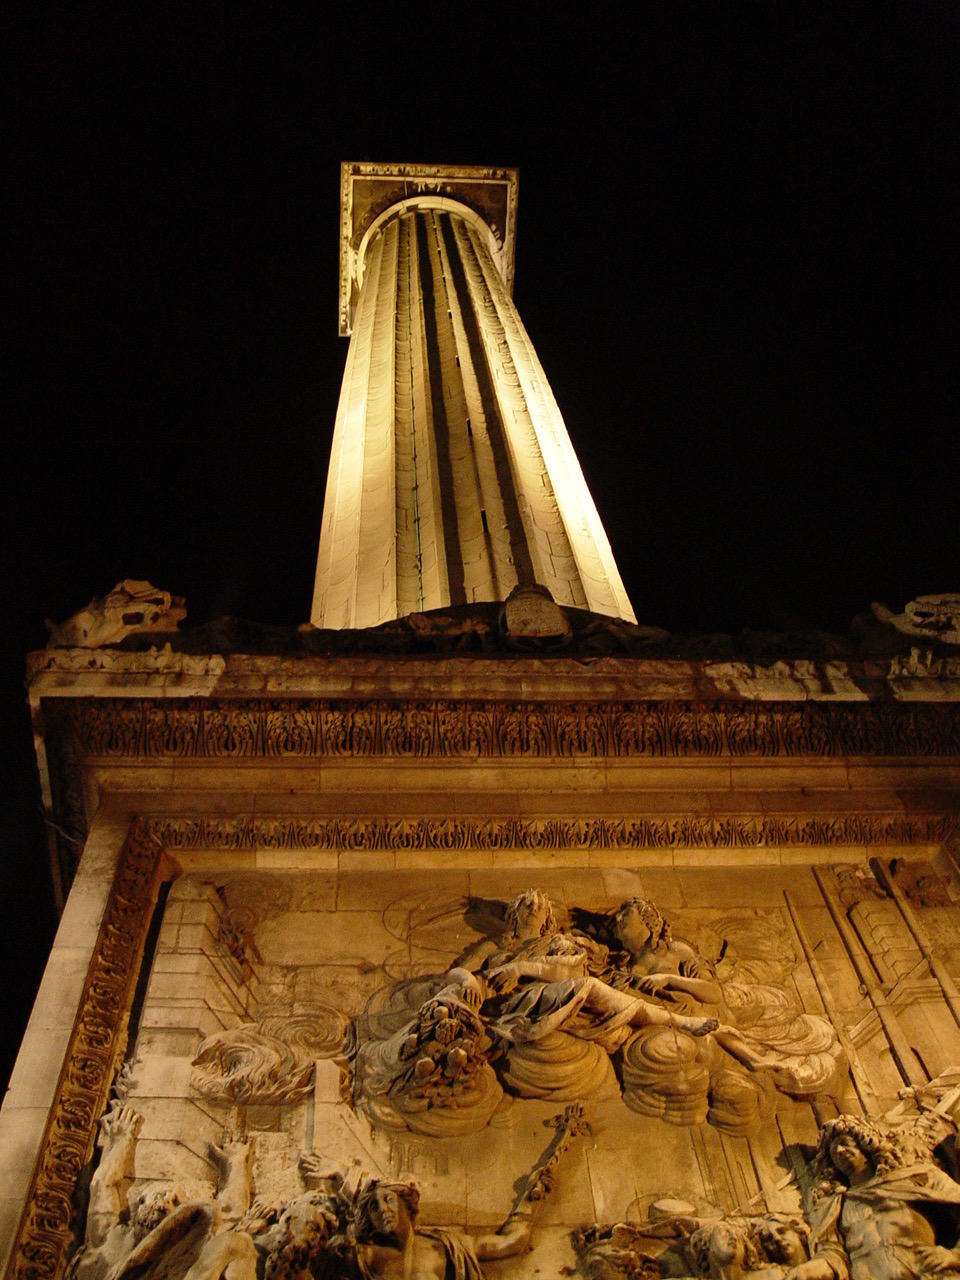 The Monument in the City of London, England